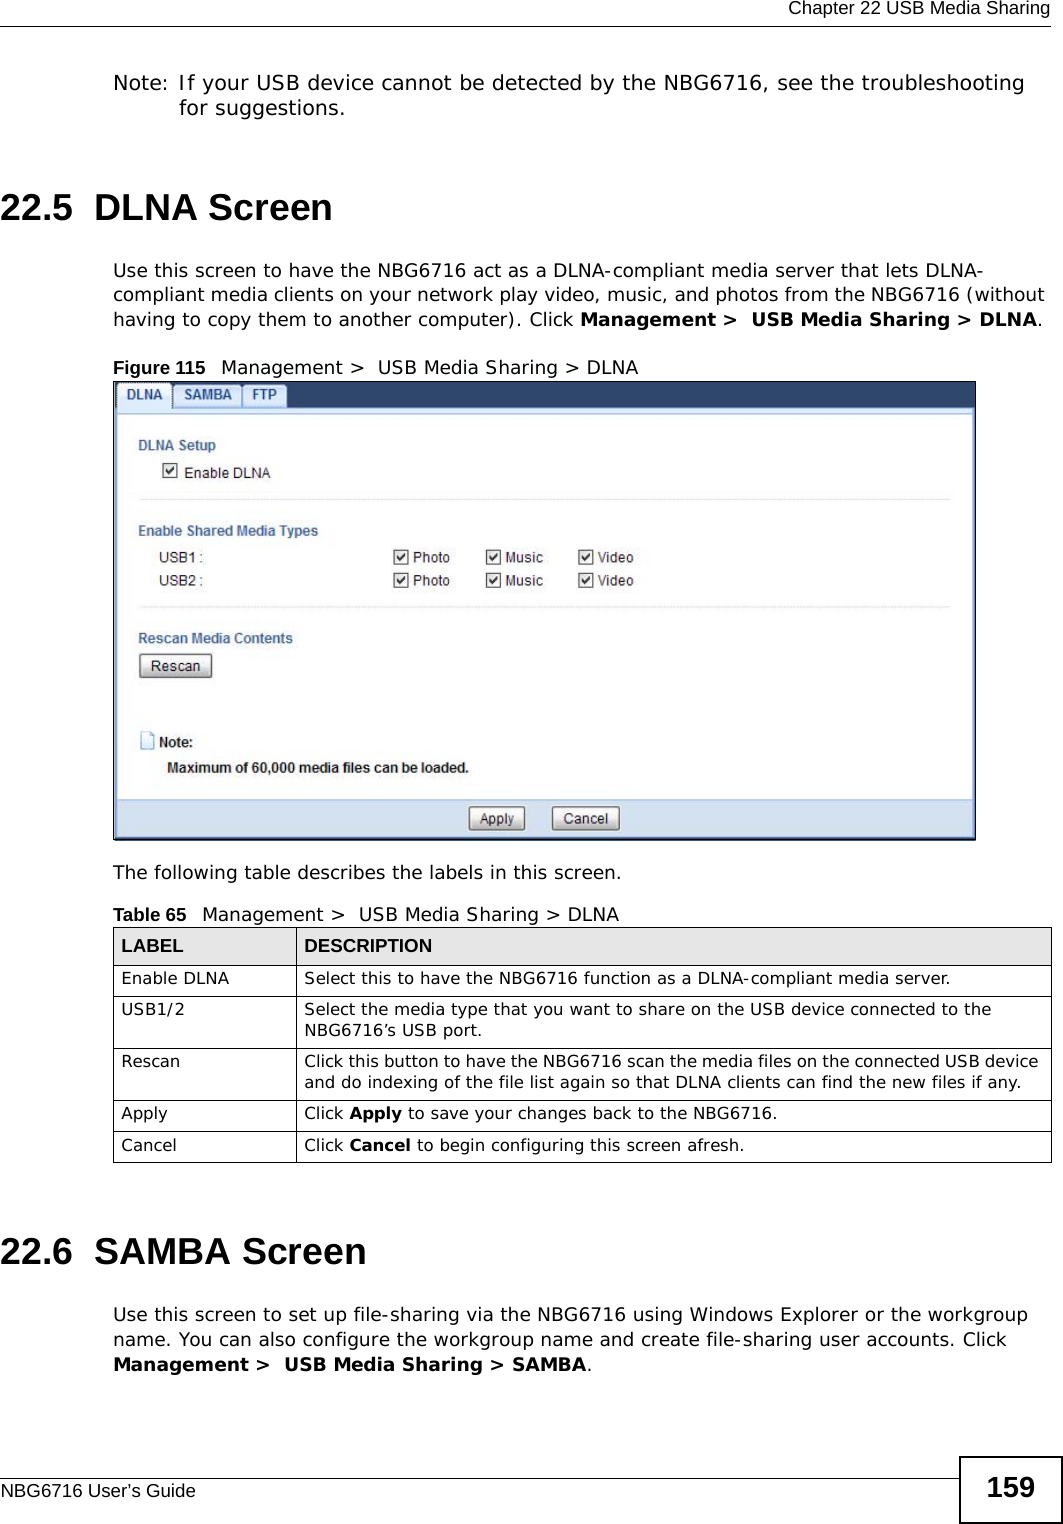  Chapter 22 USB Media SharingNBG6716 User’s Guide 159Note: If your USB device cannot be detected by the NBG6716, see the troubleshooting for suggestions. 22.5  DLNA ScreenUse this screen to have the NBG6716 act as a DLNA-compliant media server that lets DLNA-compliant media clients on your network play video, music, and photos from the NBG6716 (without having to copy them to another computer). Click Management &gt;  USB Media Sharing &gt; DLNA.Figure 115   Management &gt;  USB Media Sharing &gt; DLNA The following table describes the labels in this screen.22.6  SAMBA ScreenUse this screen to set up file-sharing via the NBG6716 using Windows Explorer or the workgroup name. You can also configure the workgroup name and create file-sharing user accounts. Click Management &gt;  USB Media Sharing &gt; SAMBA.Table 65   Management &gt;  USB Media Sharing &gt; DLNALABEL DESCRIPTIONEnable DLNA Select this to have the NBG6716 function as a DLNA-compliant media server.USB1/2 Select the media type that you want to share on the USB device connected to the NBG6716’s USB port.Rescan  Click this button to have the NBG6716 scan the media files on the connected USB device and do indexing of the file list again so that DLNA clients can find the new files if any.Apply Click Apply to save your changes back to the NBG6716.Cancel Click Cancel to begin configuring this screen afresh.